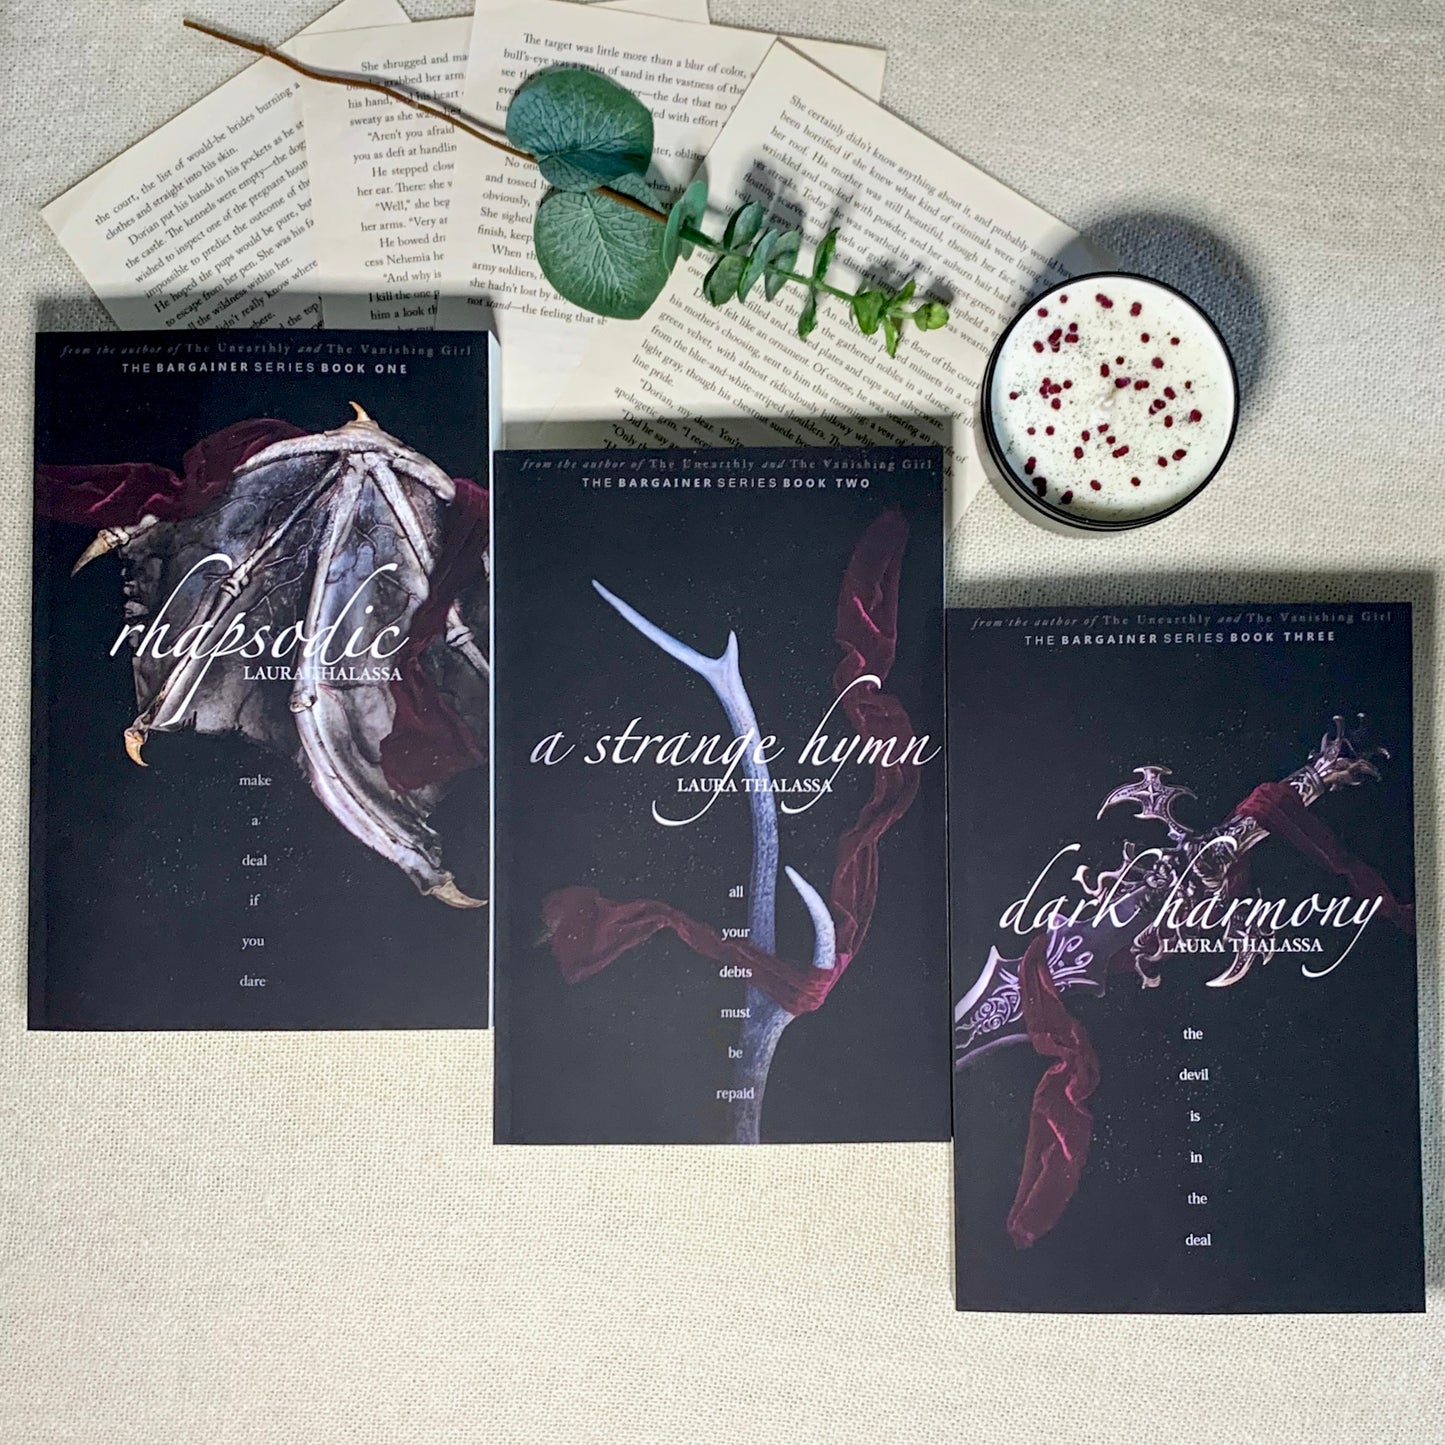 The Bargainer Series by Laura Thalassa